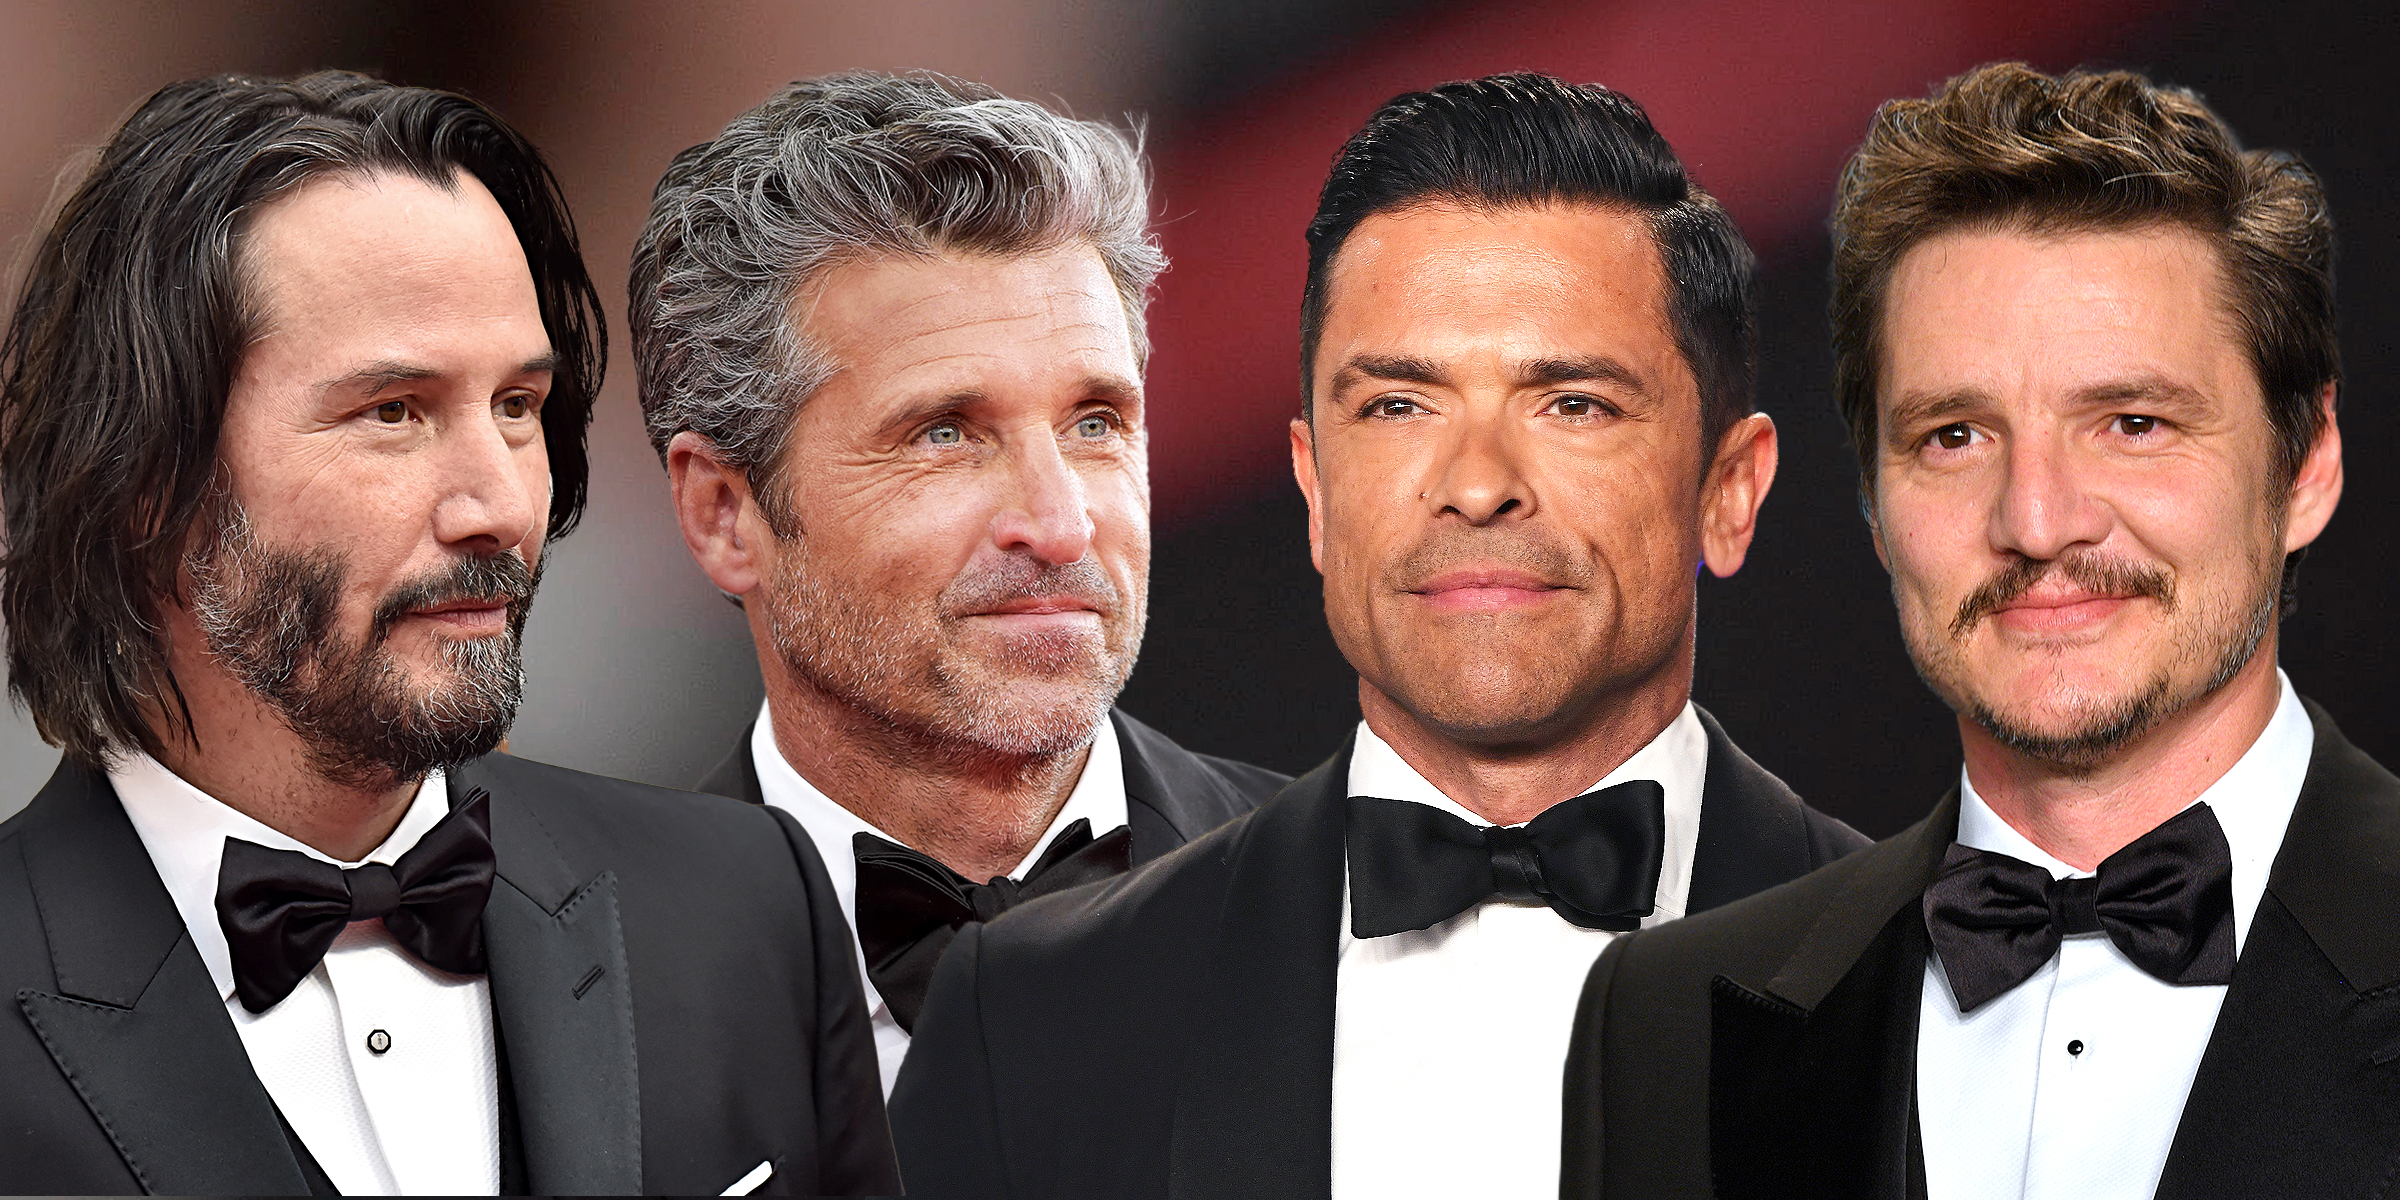 Keanu Reeves, Patrick Dempsey, Mark Consuelos y Pedro Pascal | Foto: Getty Images